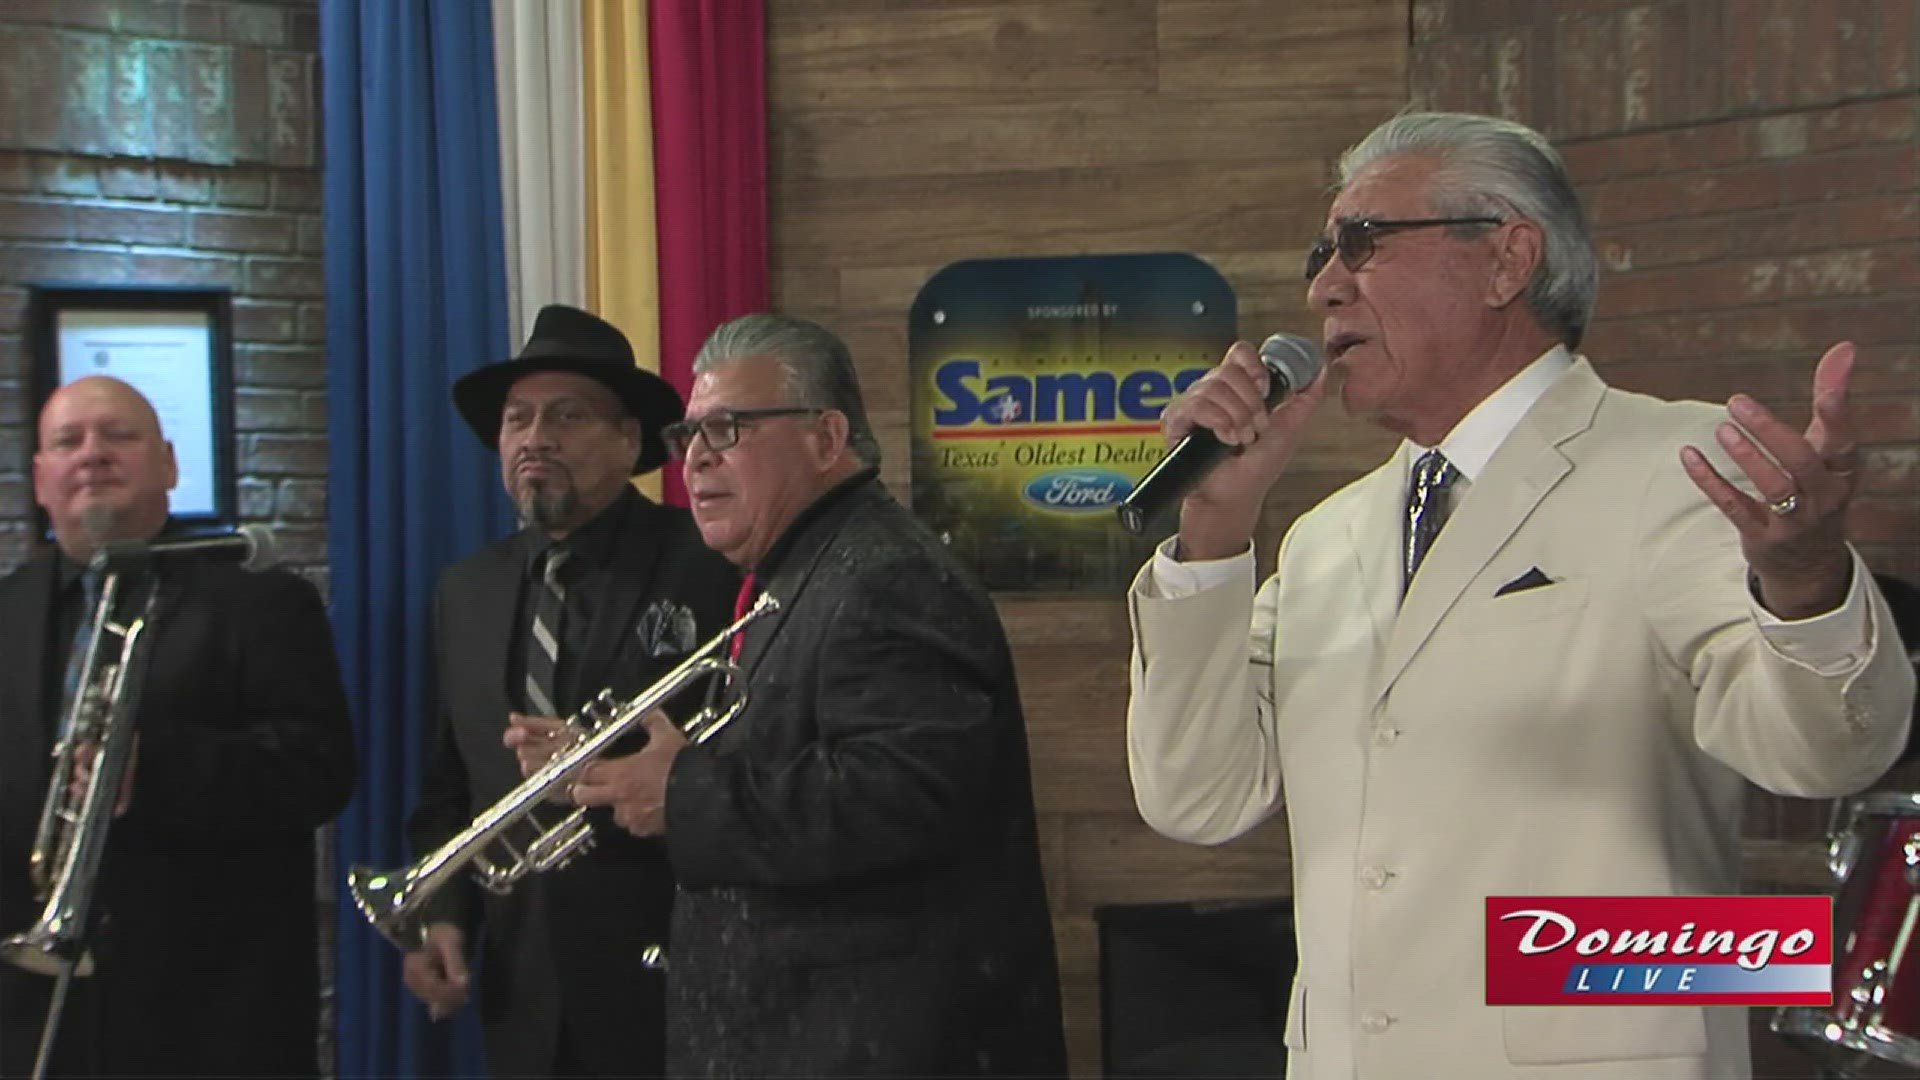 Ruben Ramos & the Mexican Revolution joined us on Domingo Live to eprform their song "En Tejas."